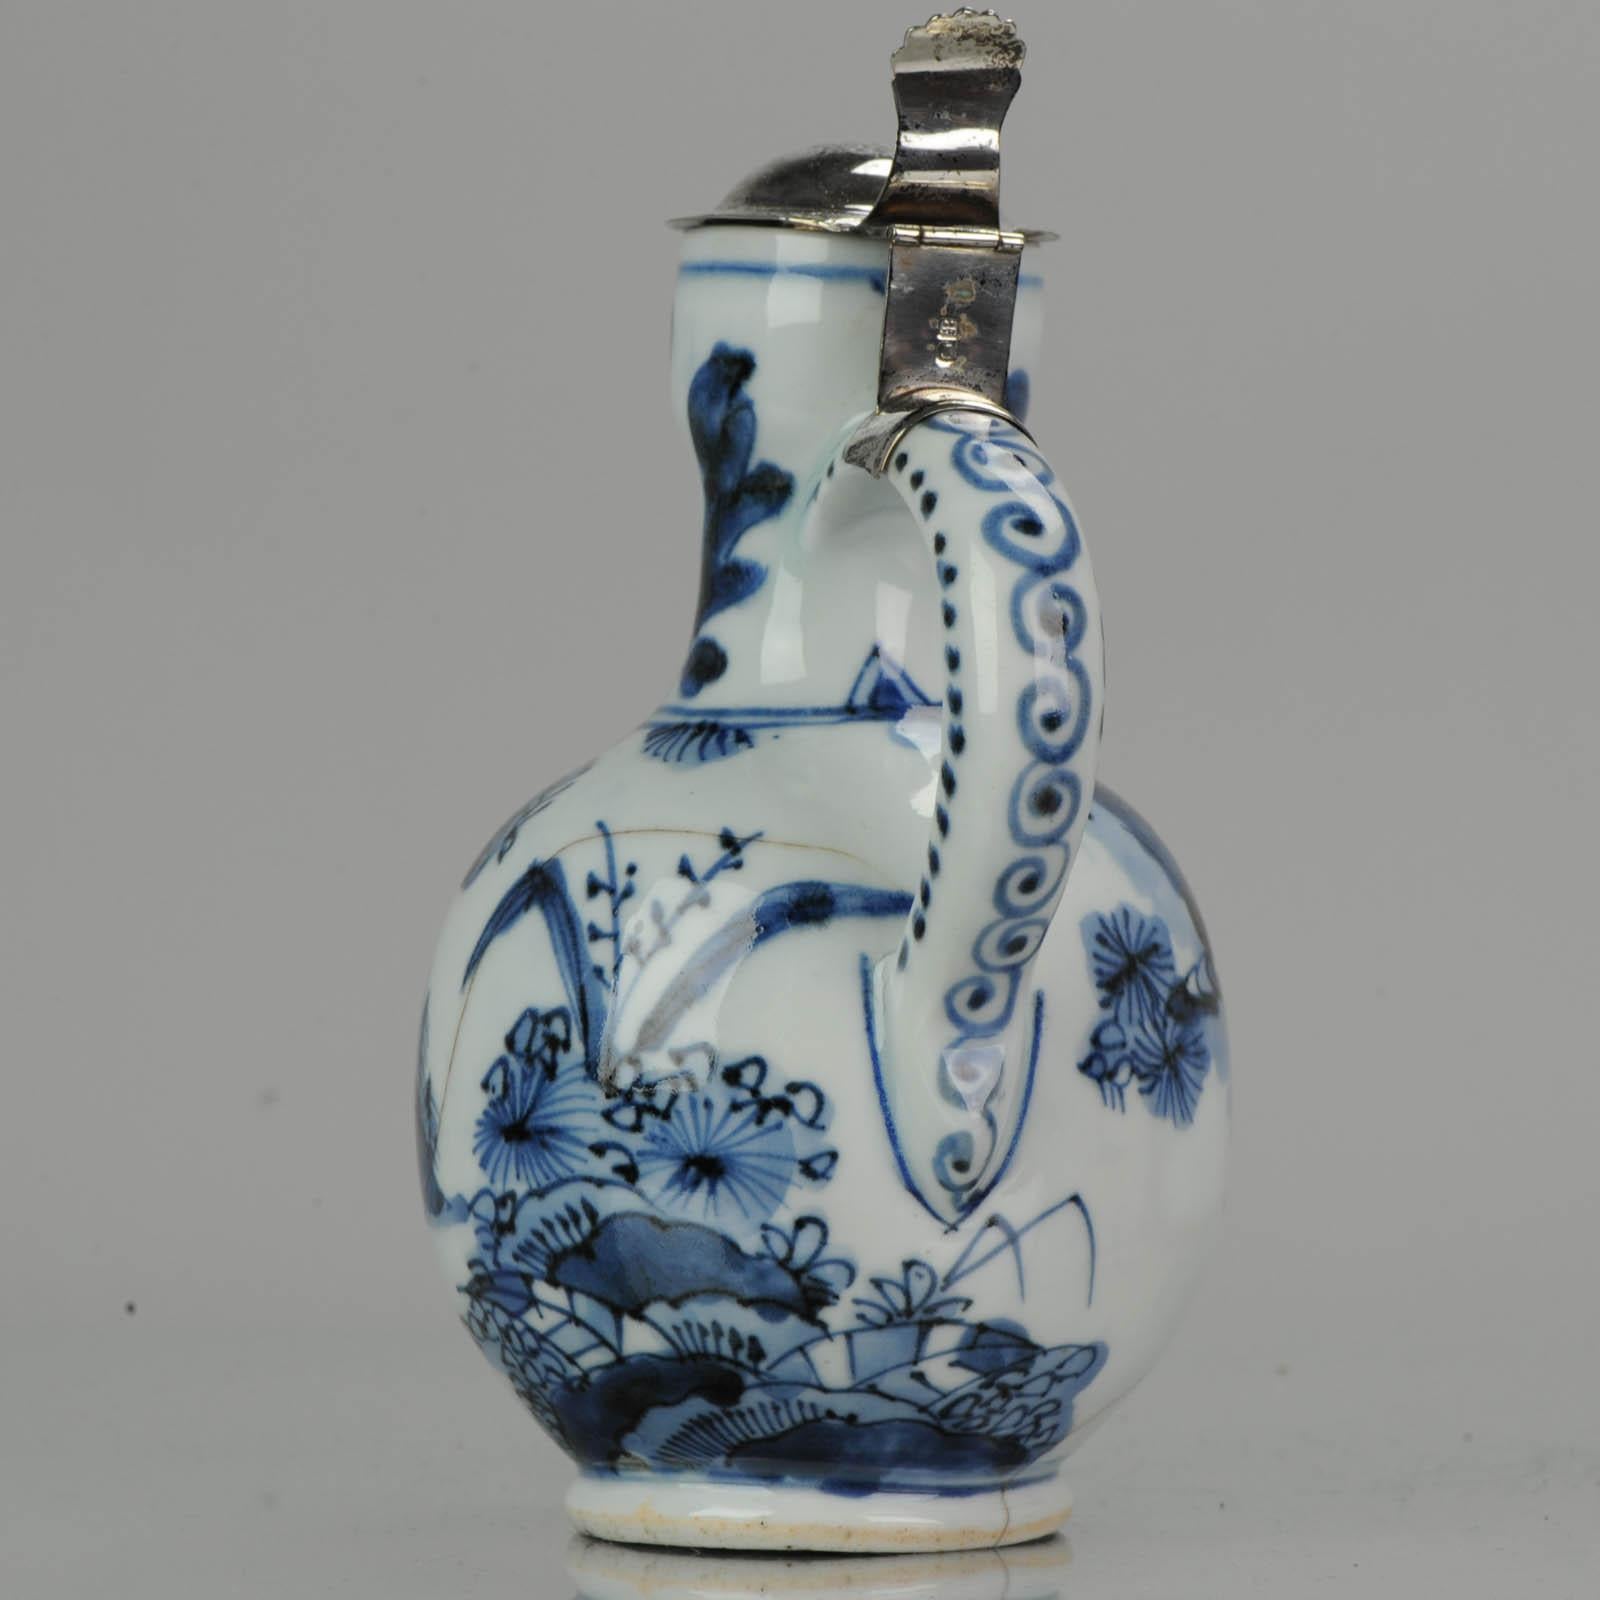 Antique 17th Century Arita Jug with Dutch Silver Lid Japan Edo Period Porcelain In Good Condition For Sale In Amsterdam, Noord Holland